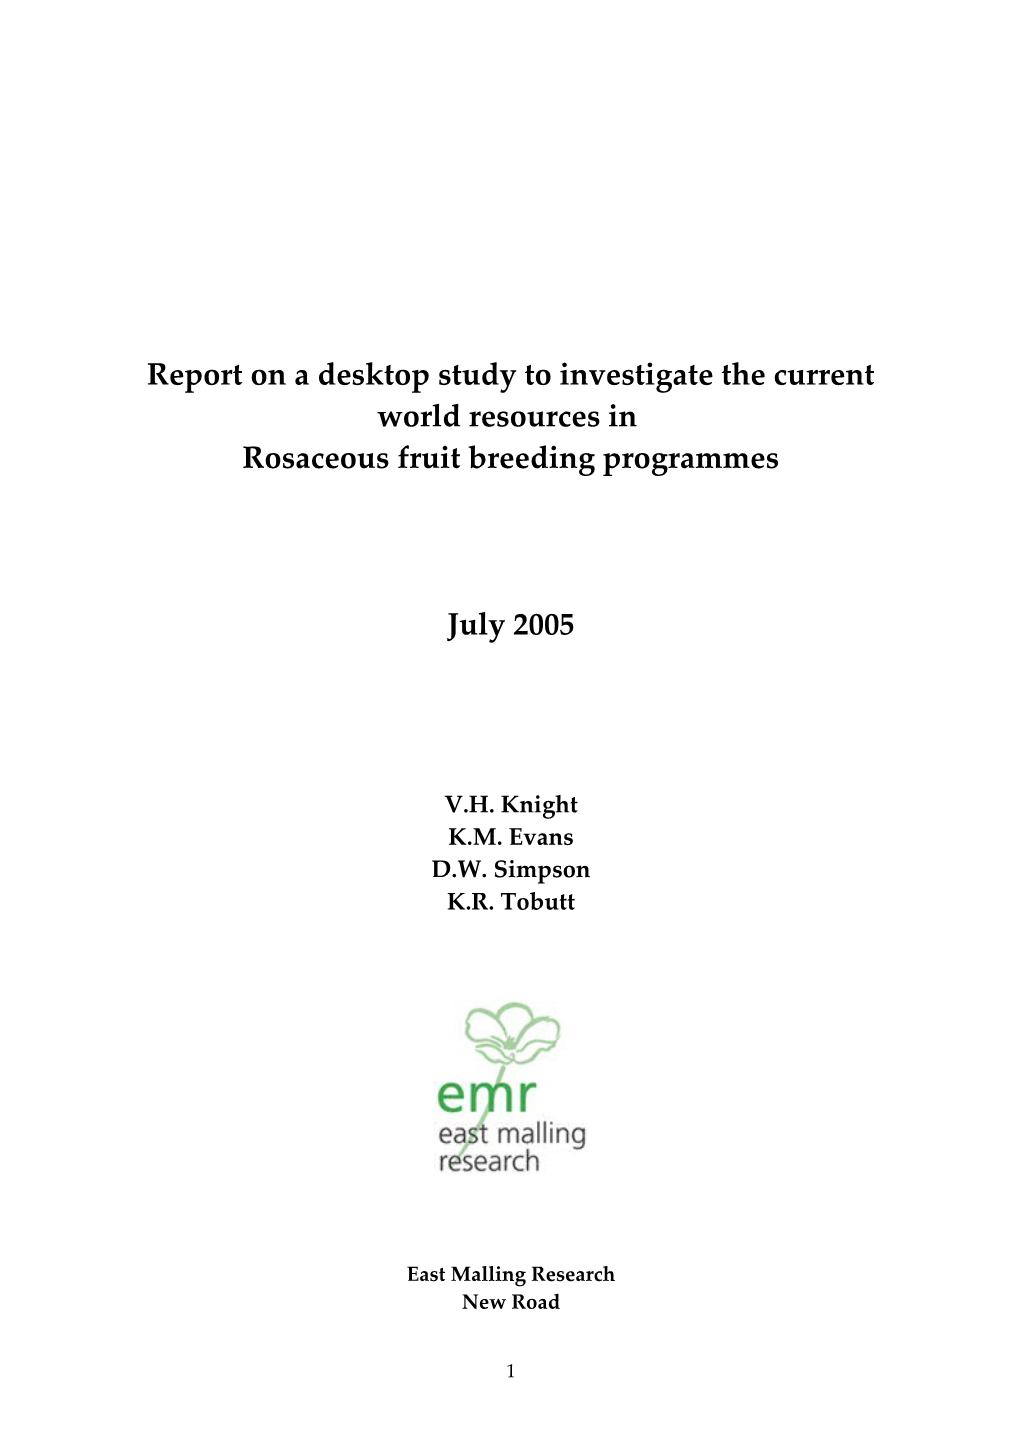 Report on a Desktop Study to Investigate the Current World Resources In